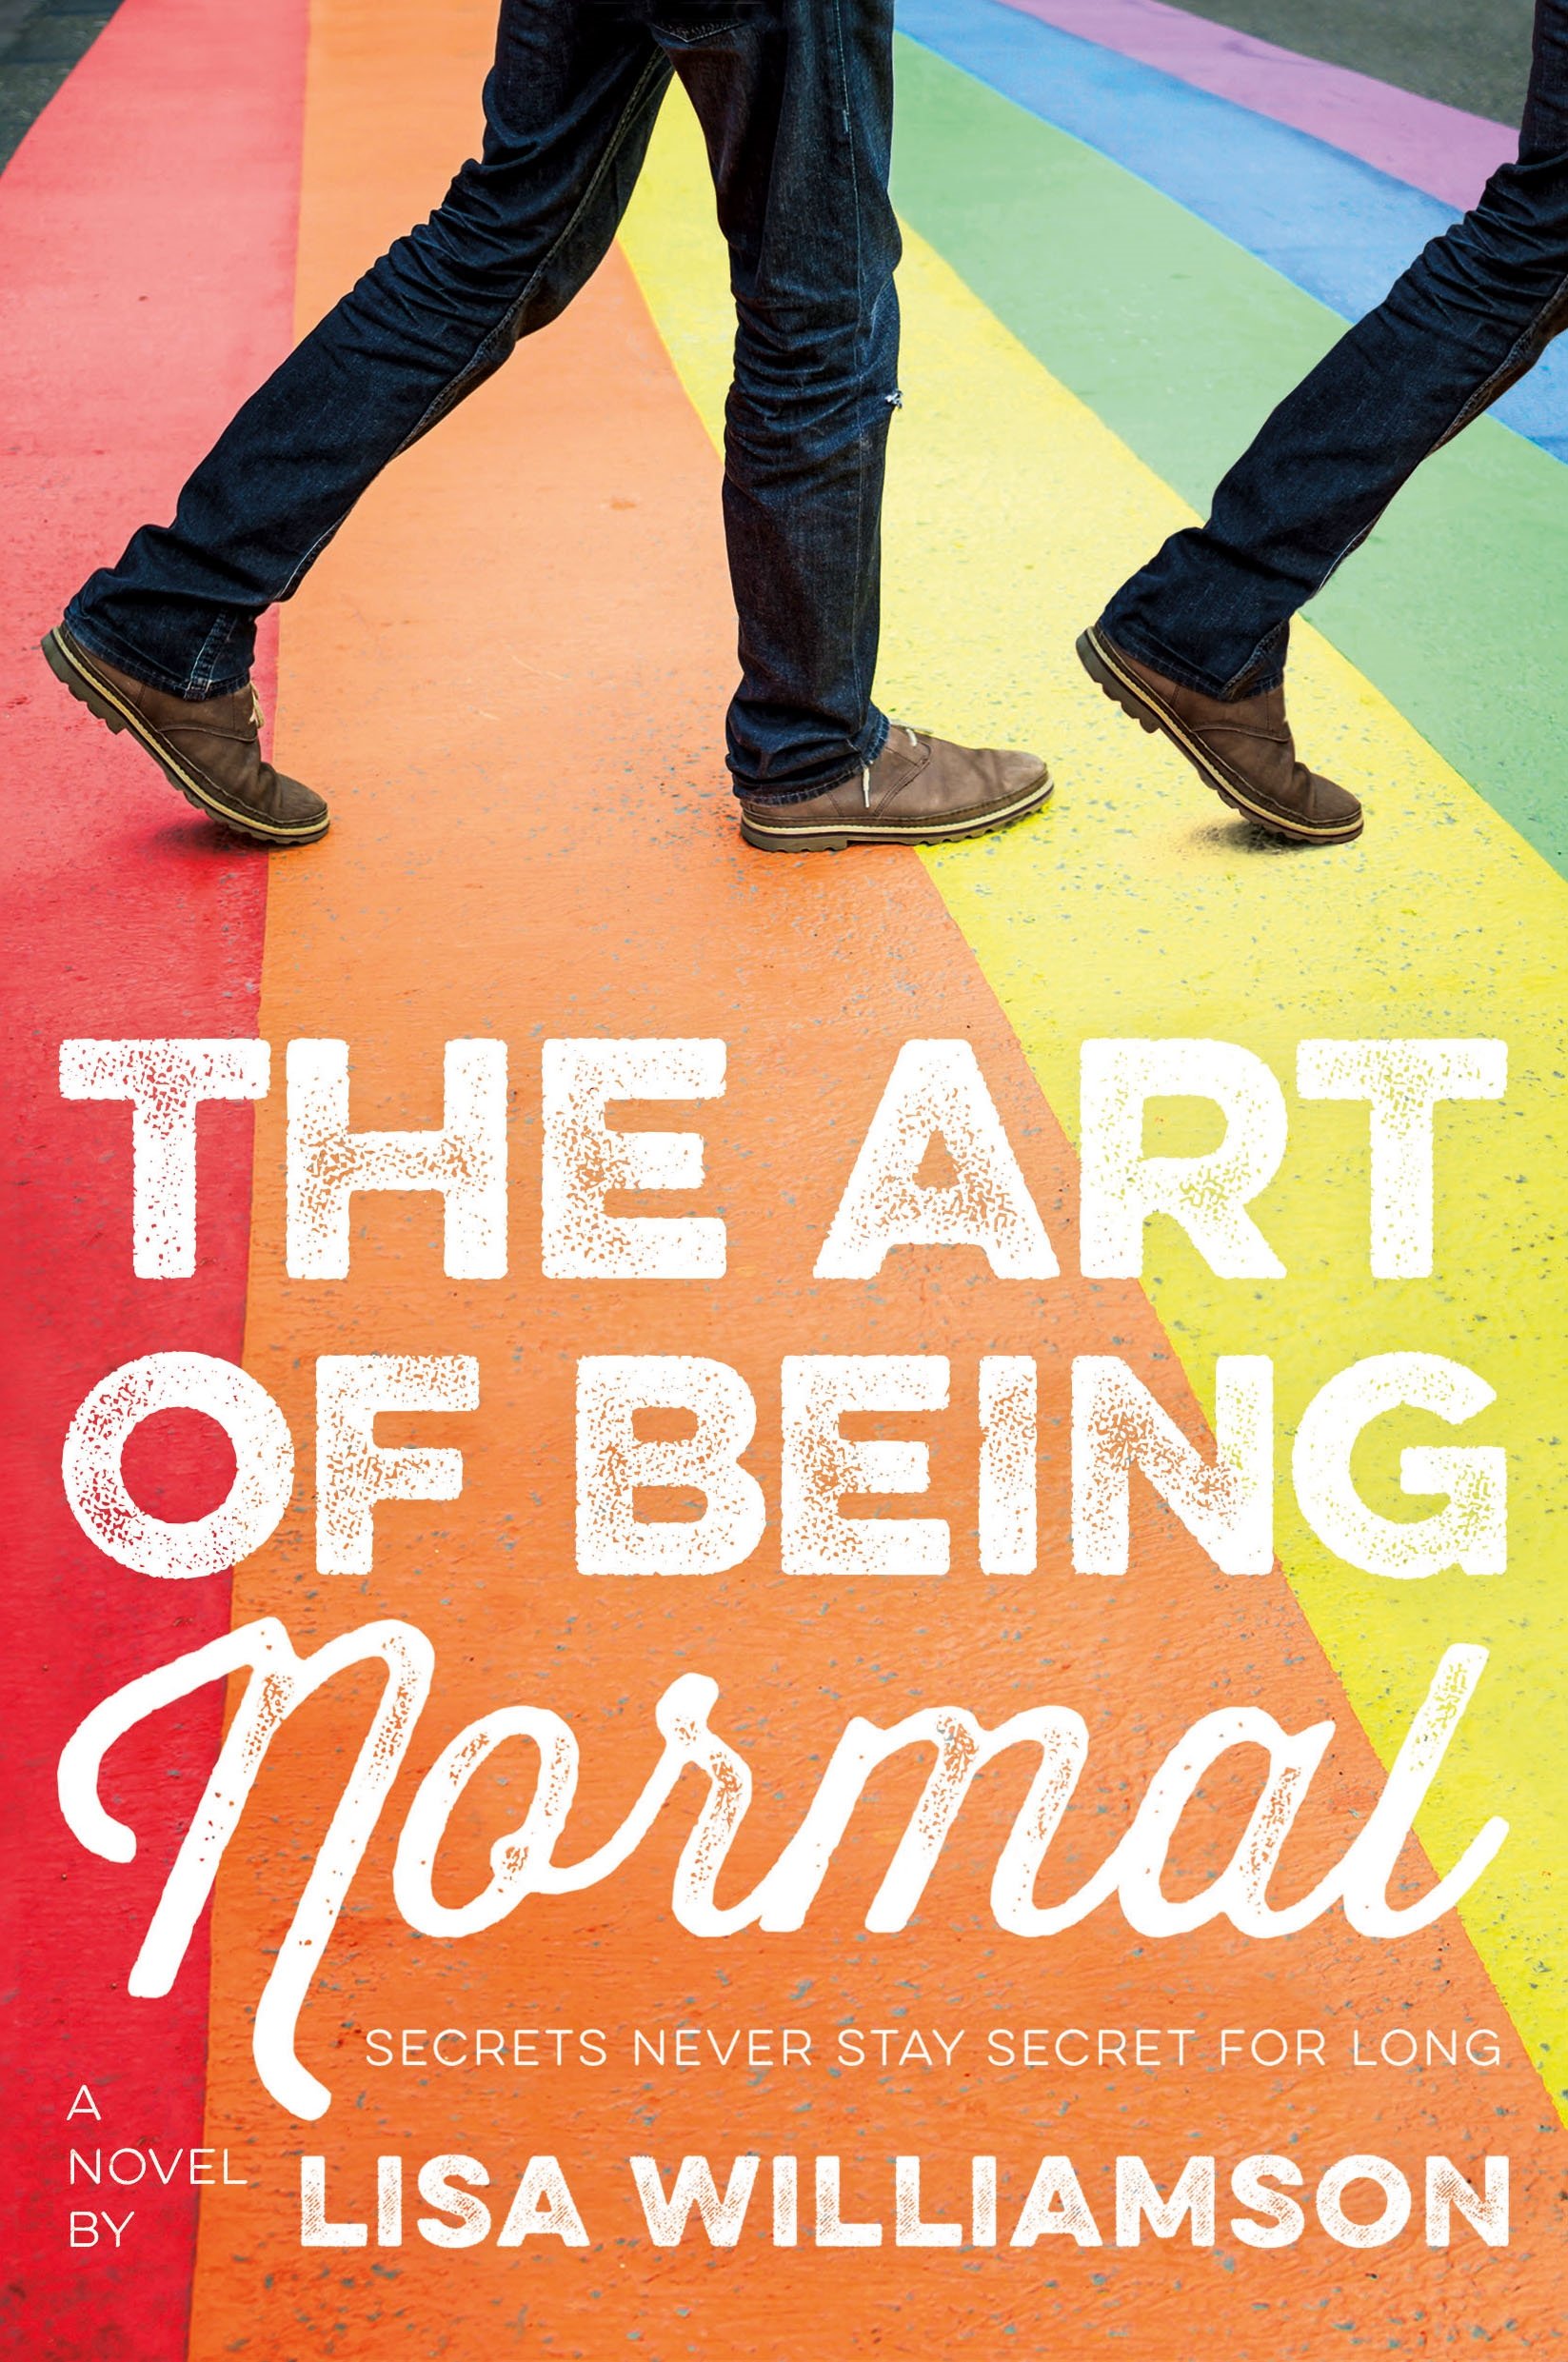 The Art of Being Normal